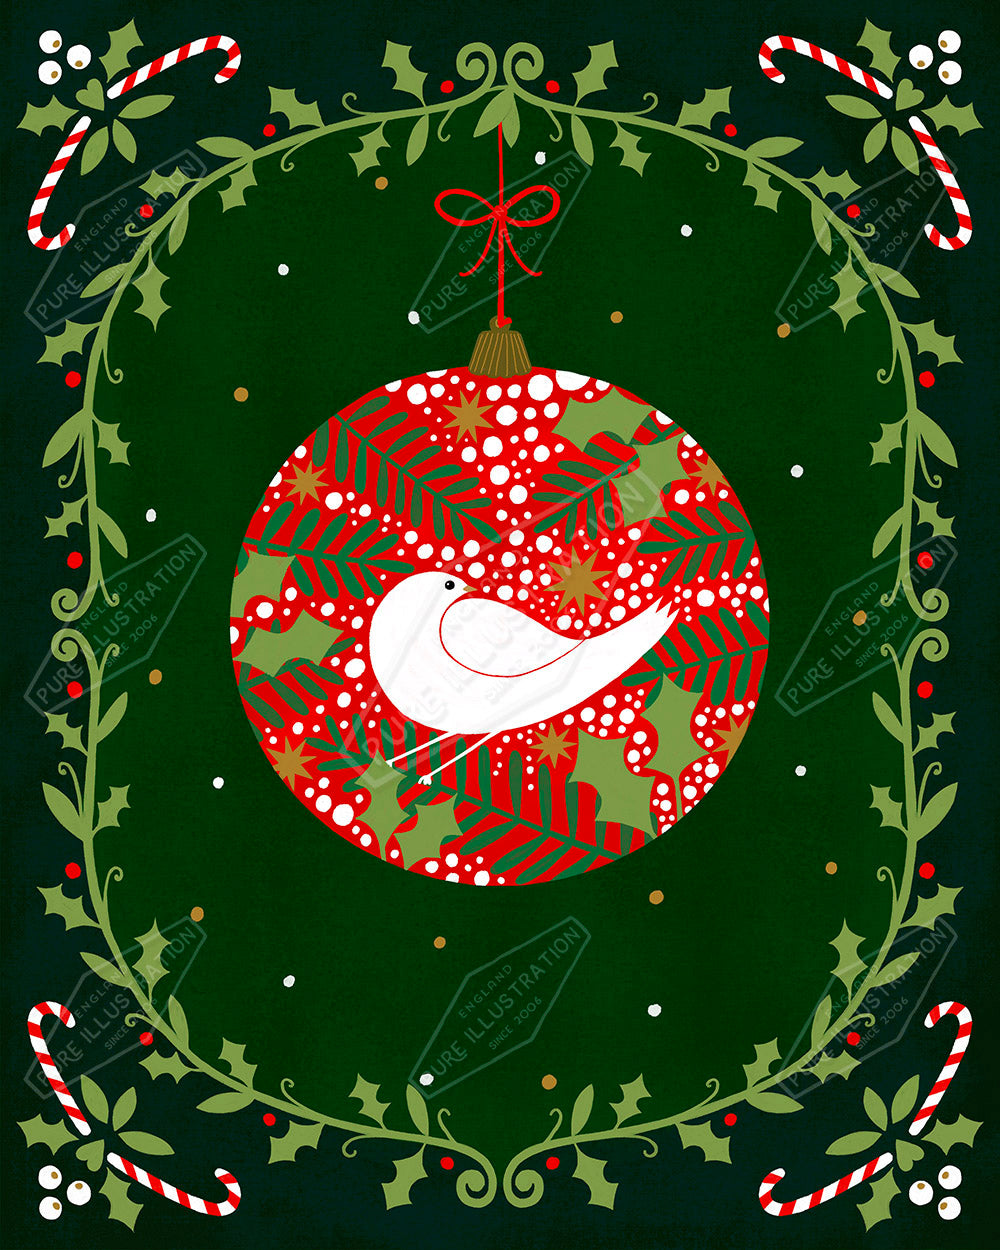 Dove Decoration Christmas Illustration by Sian Summerhayes for Pure Art Licensing & Surface Design Agency